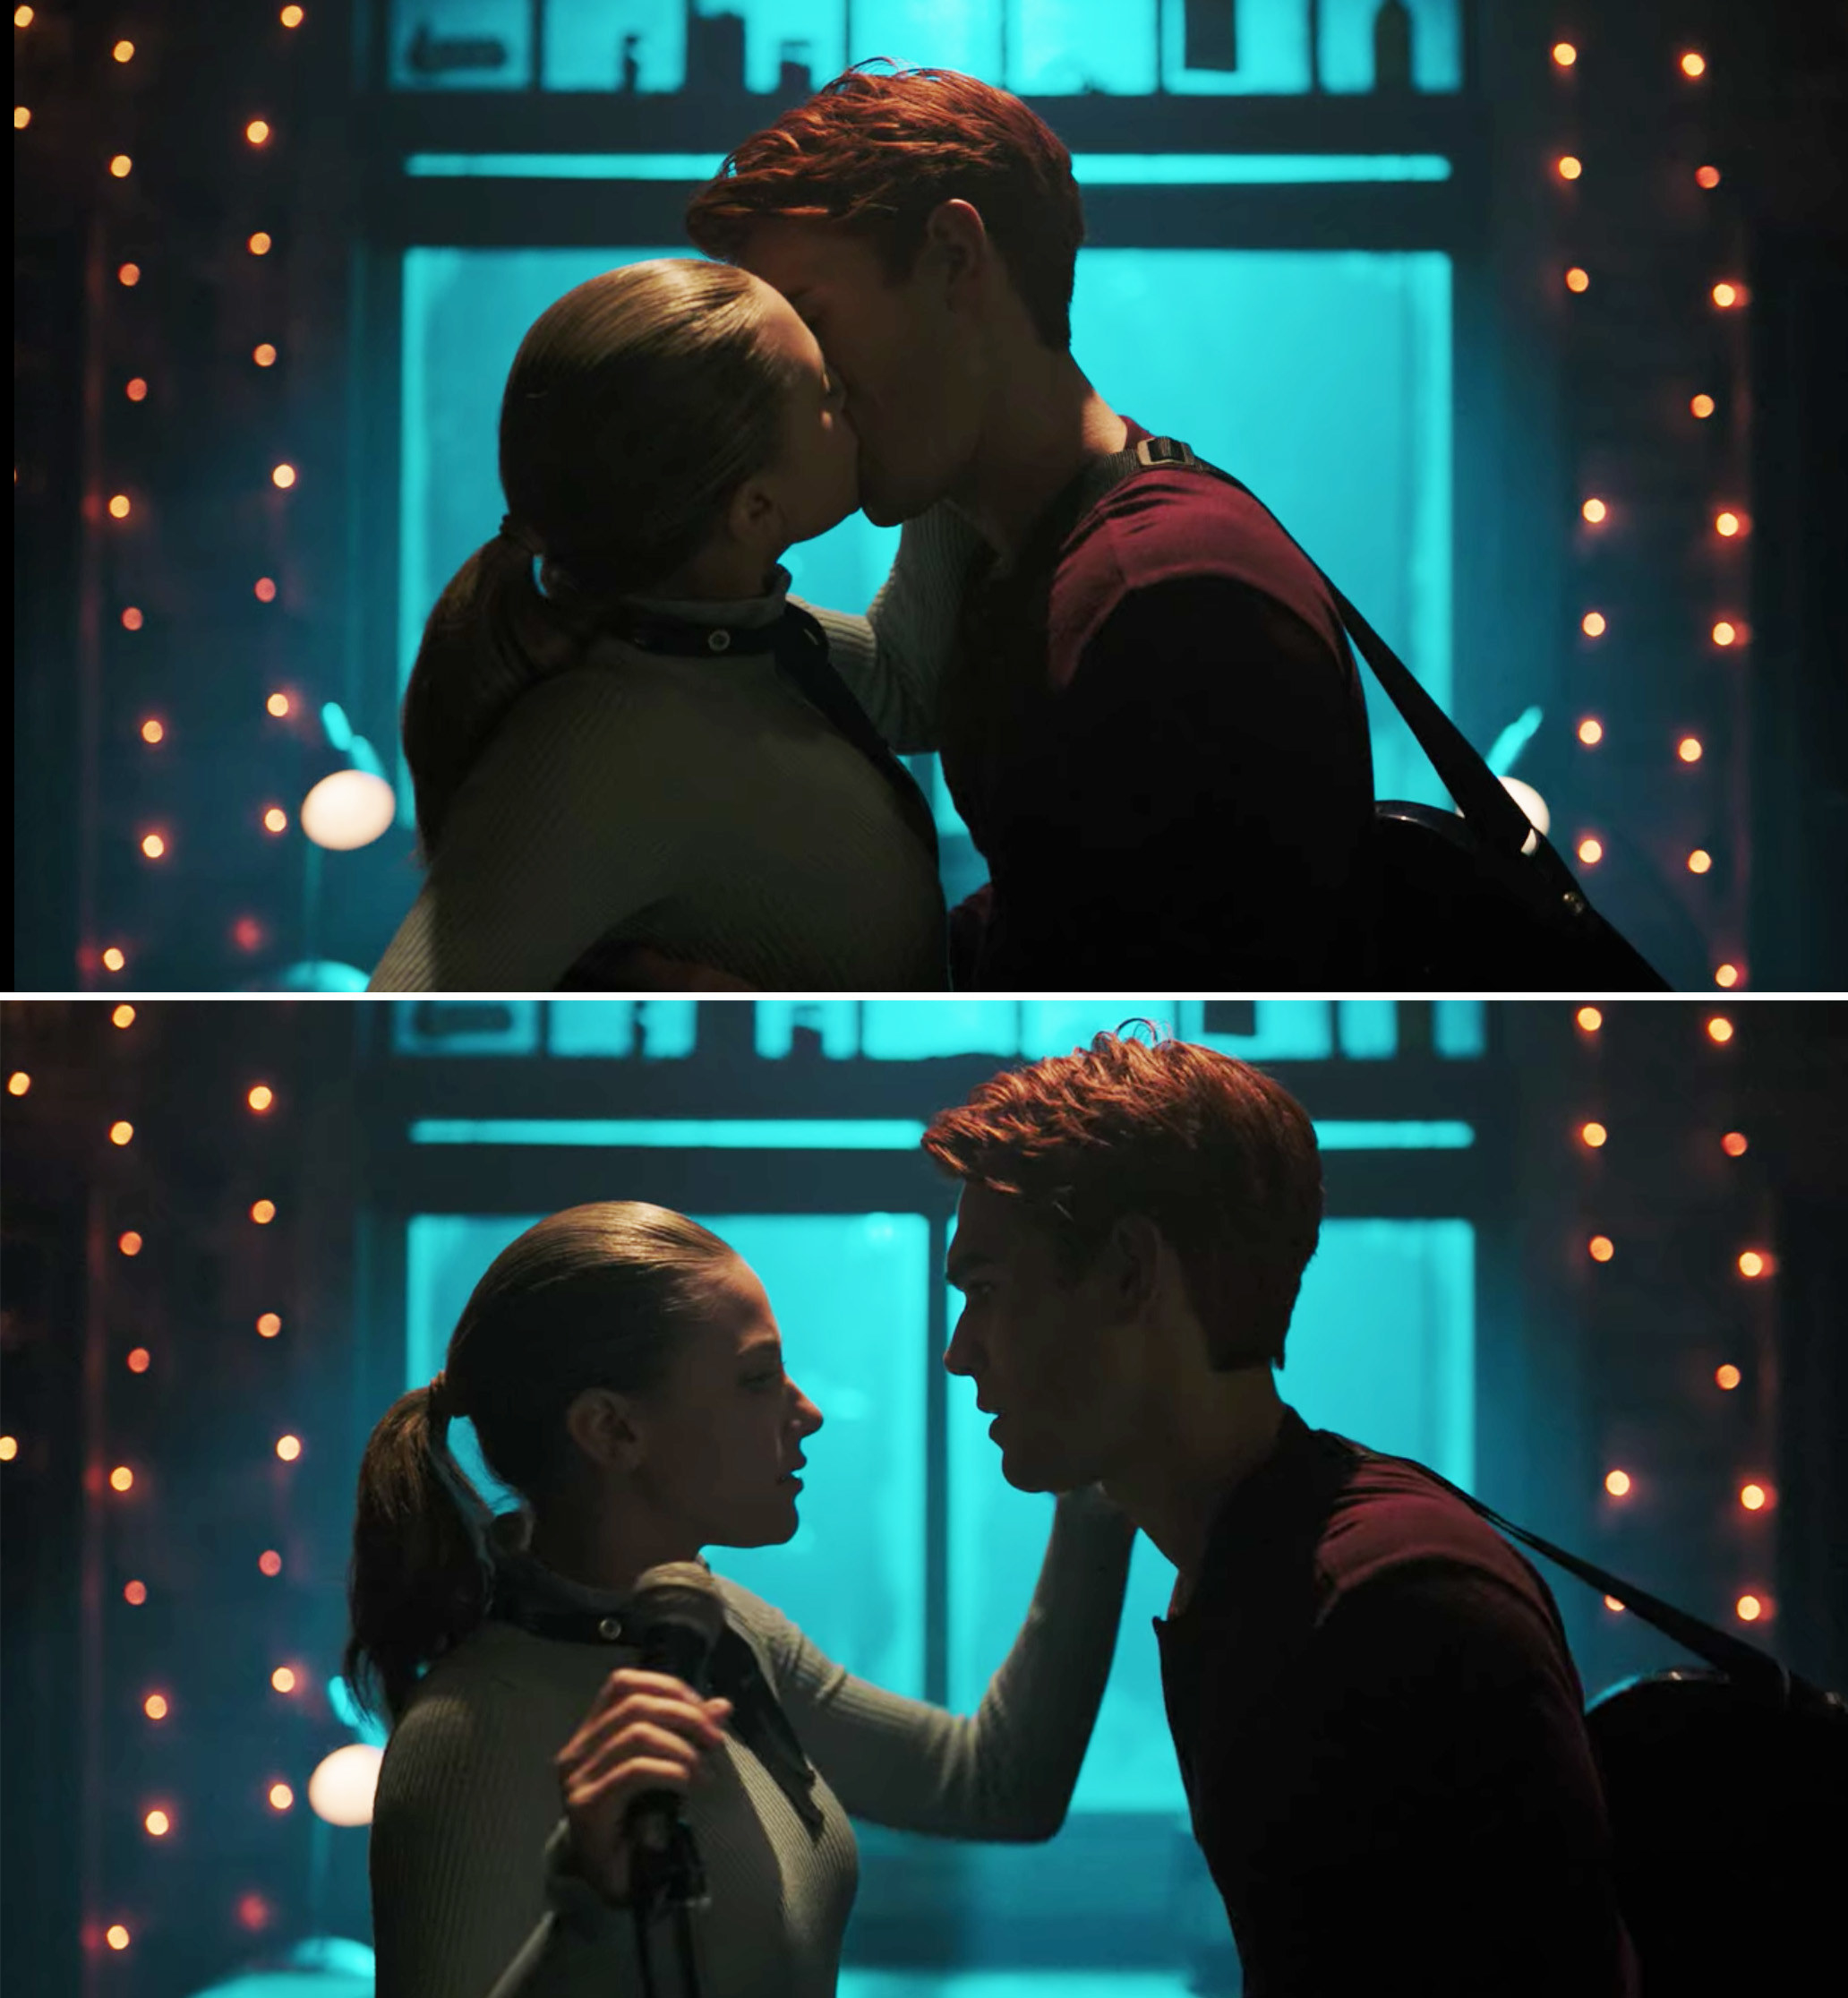 Archie and Betty kissing